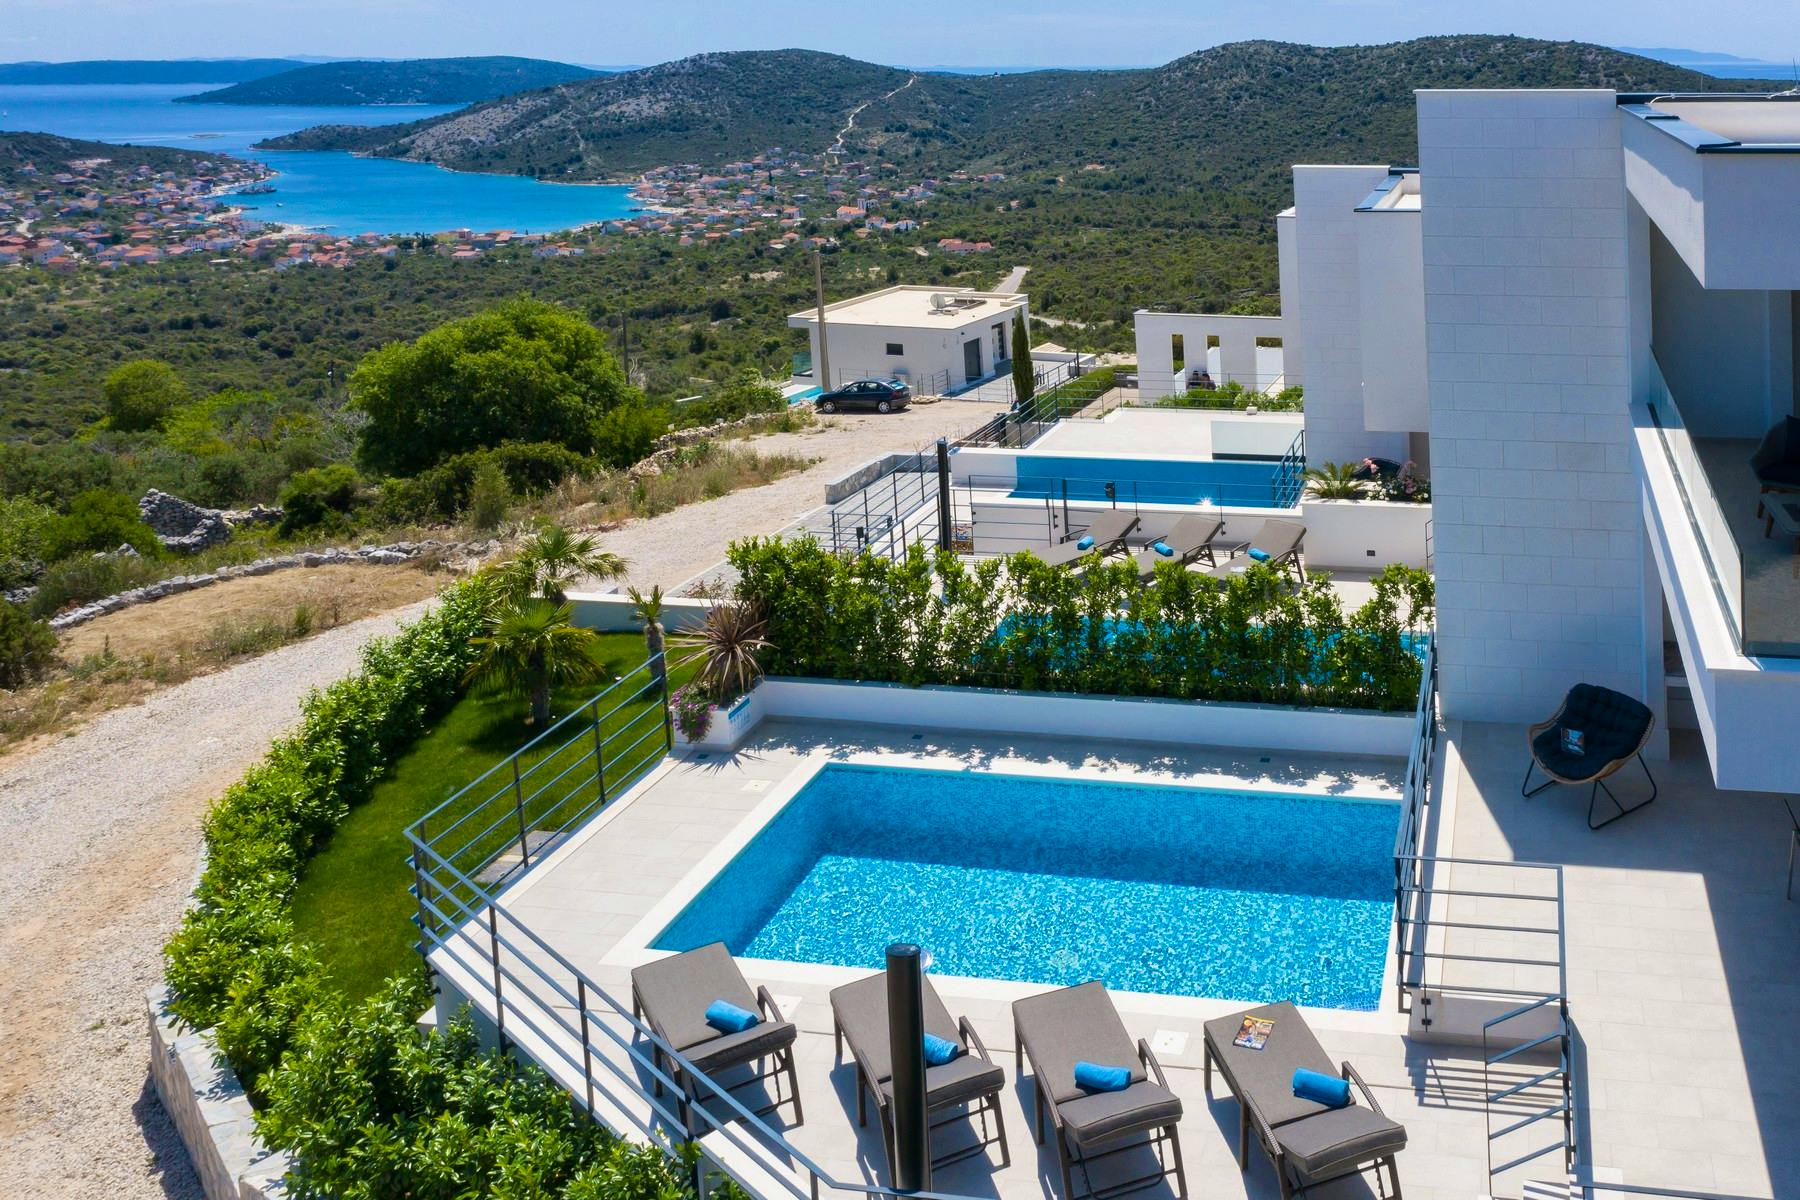 Villa in a peaceful location and open sea view